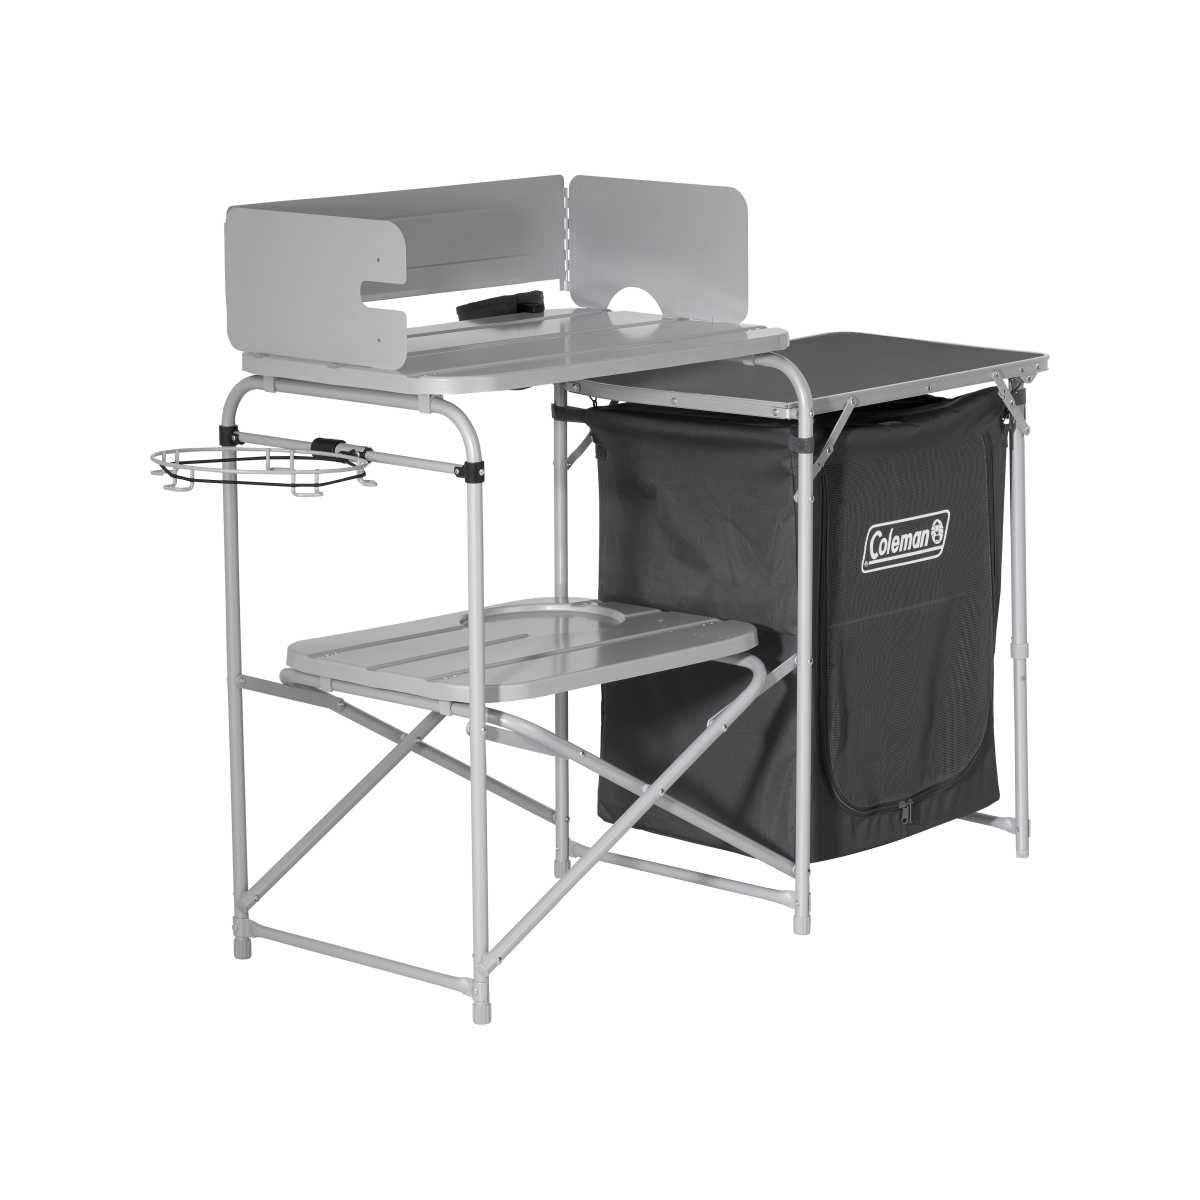 COLEMAN Kueckenbox COOKING STAND - 2199743